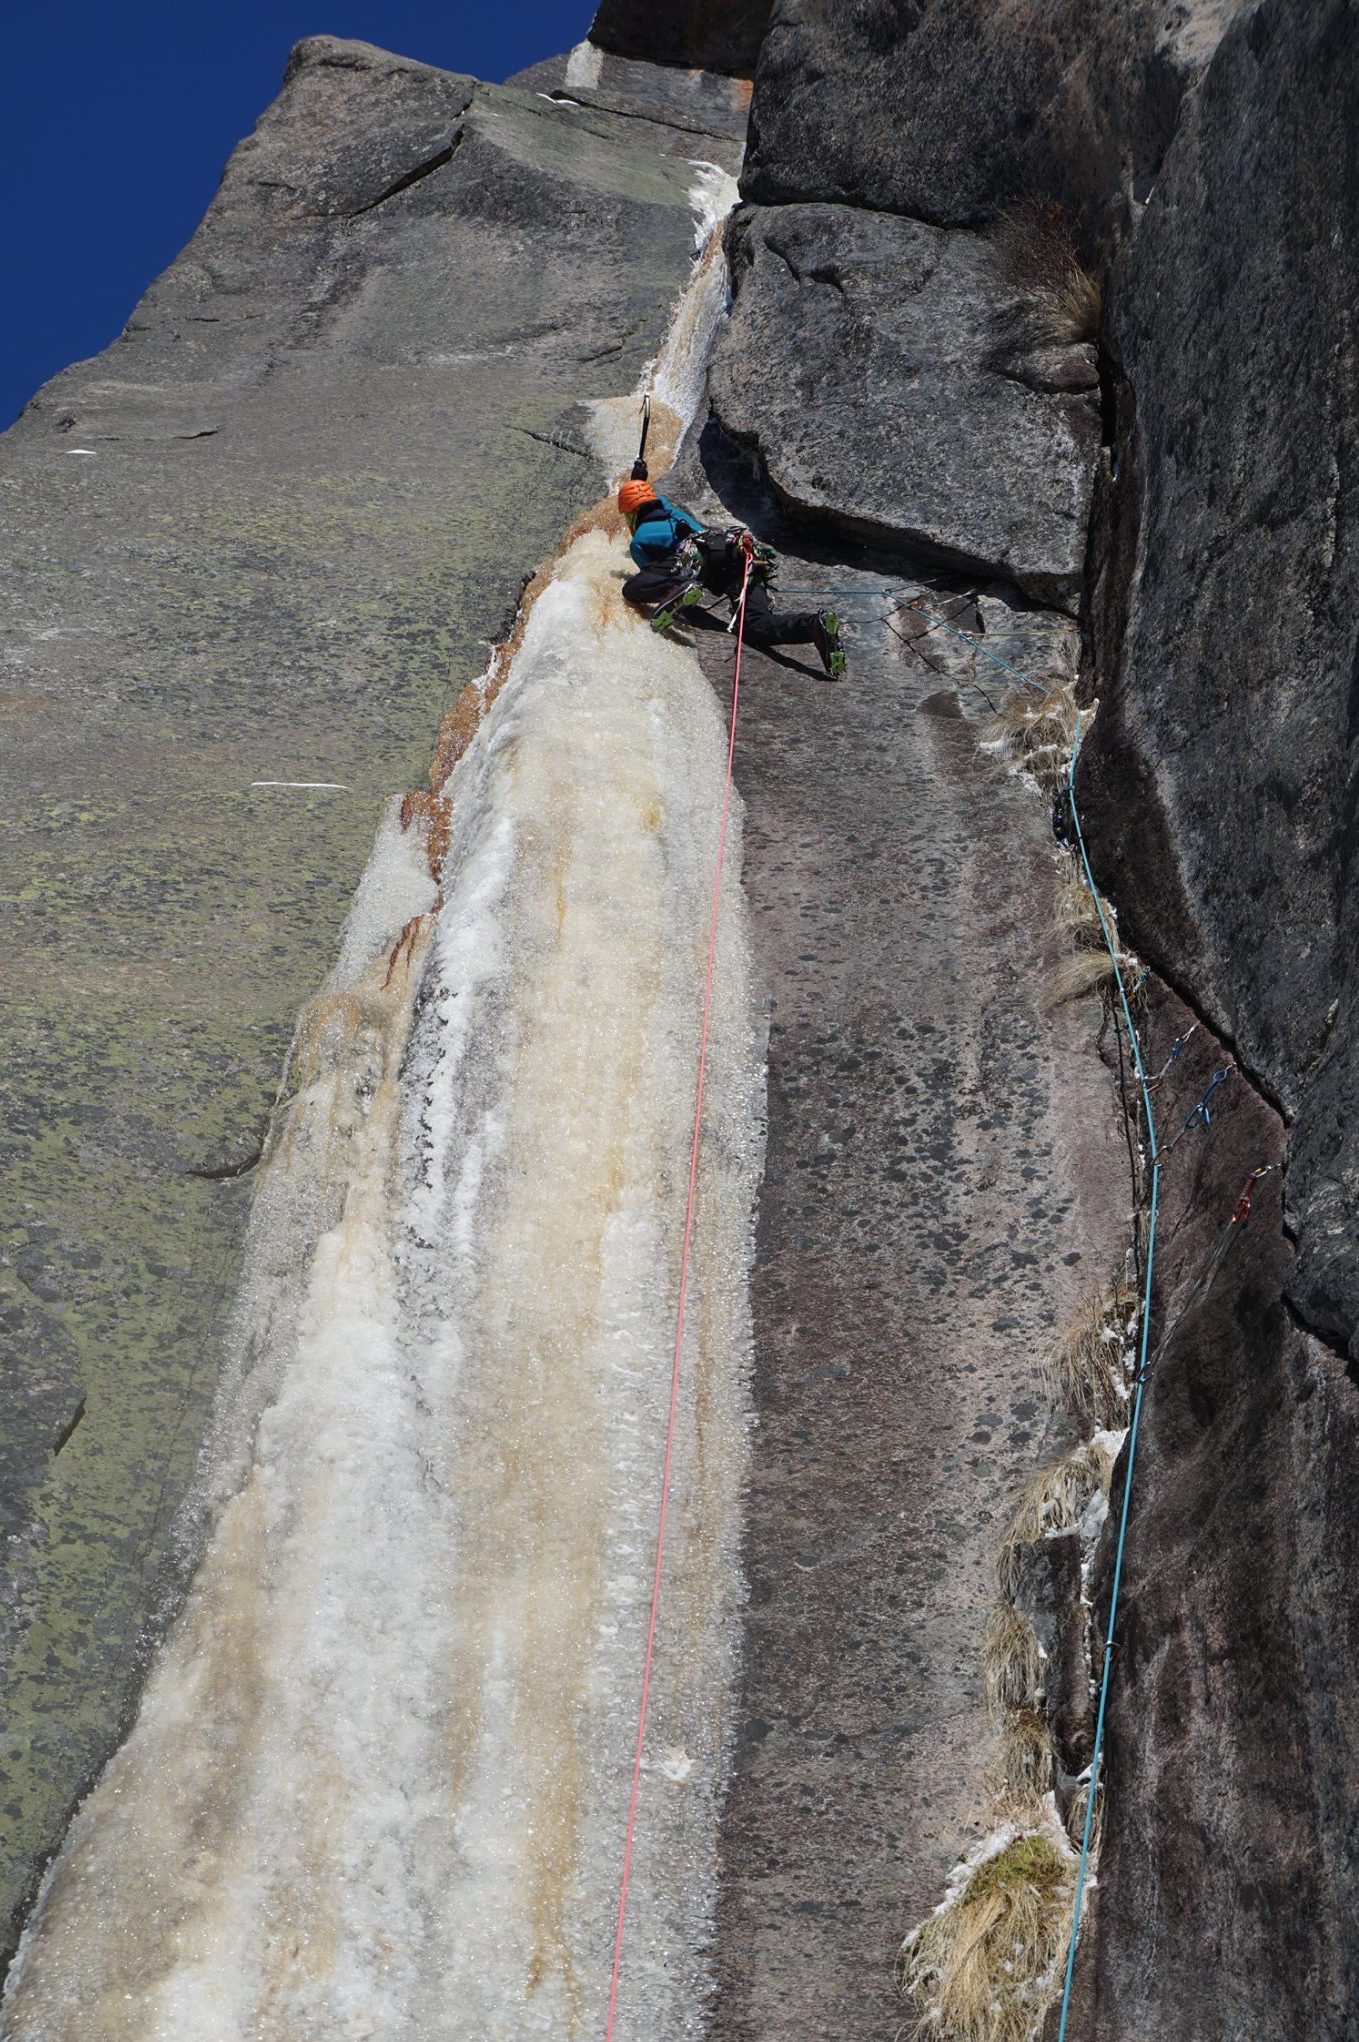 Maarten van Haeren on the first pitch of route Ame du Nord or, Northern Soul (125m, M6, WI5). [Photo] Pete Takeda